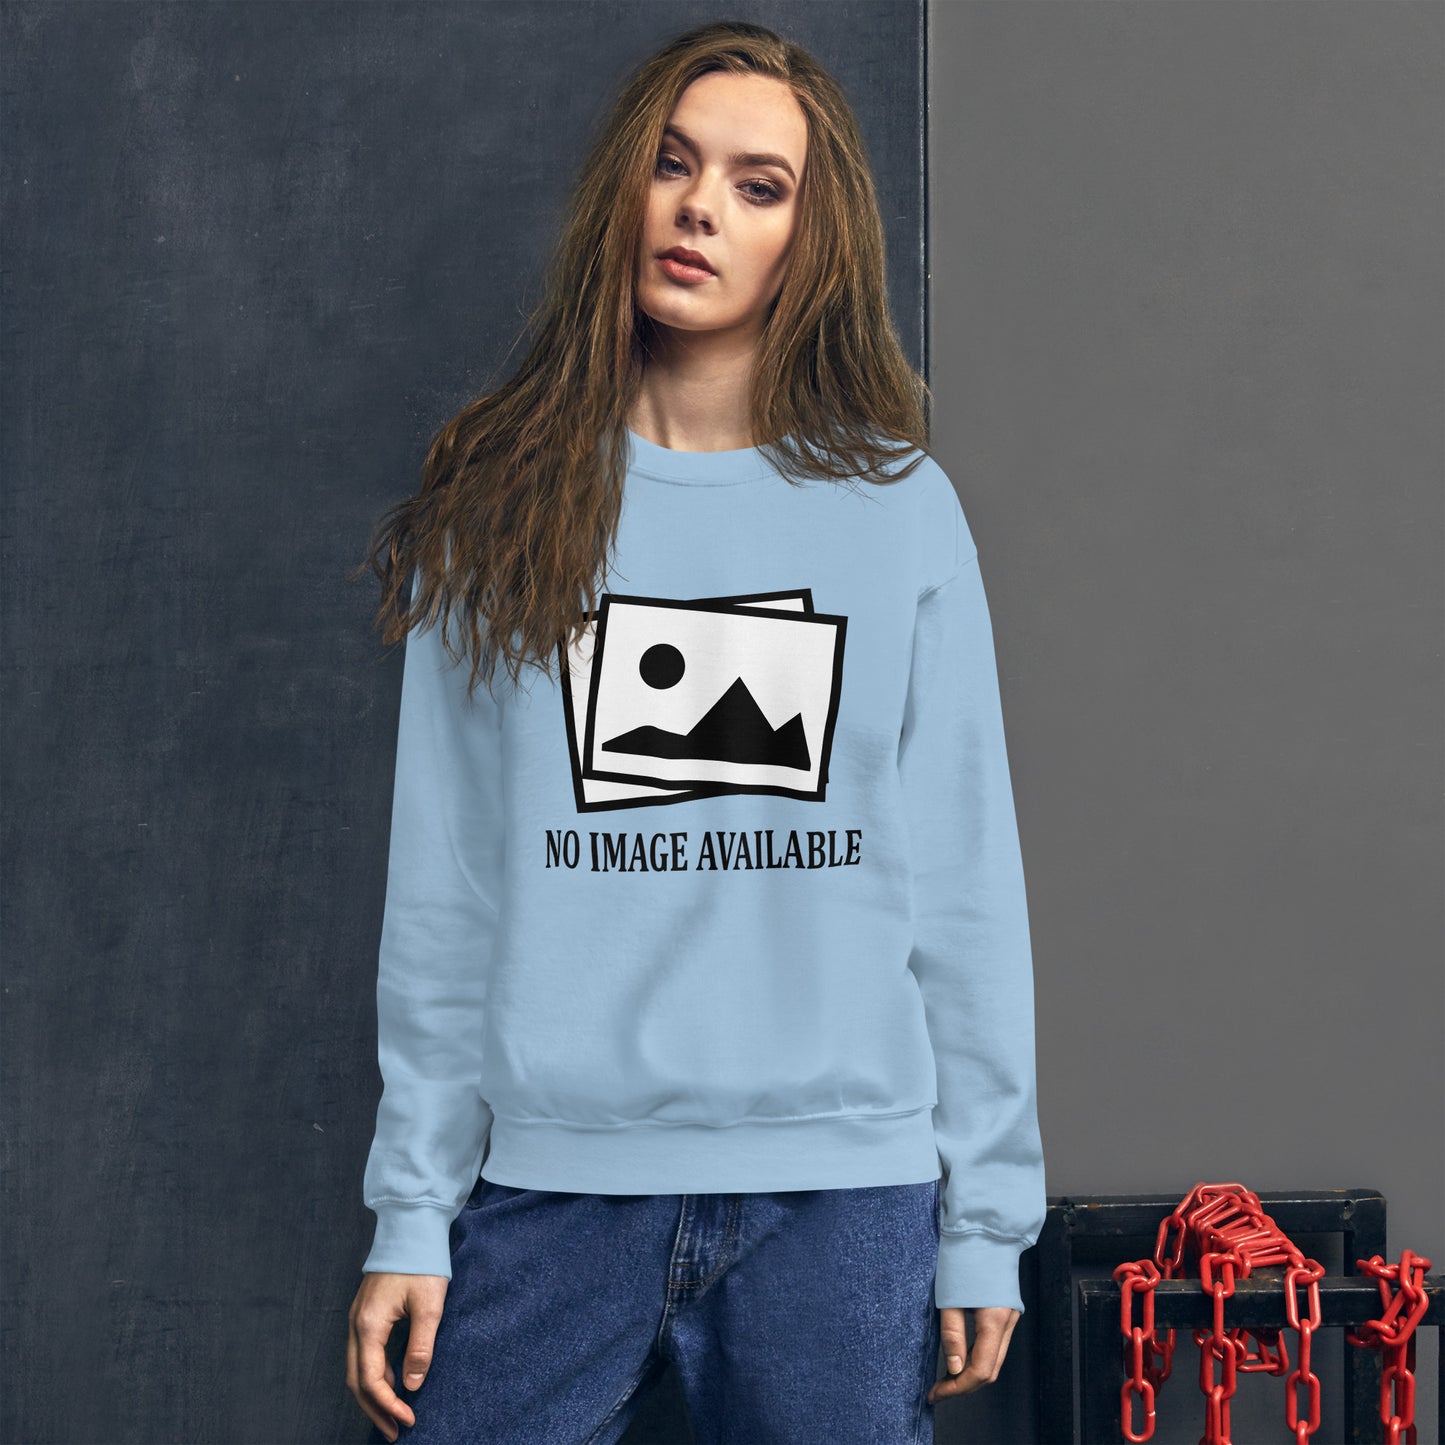 Women with light blue sweatshirt with image and text "no image available"